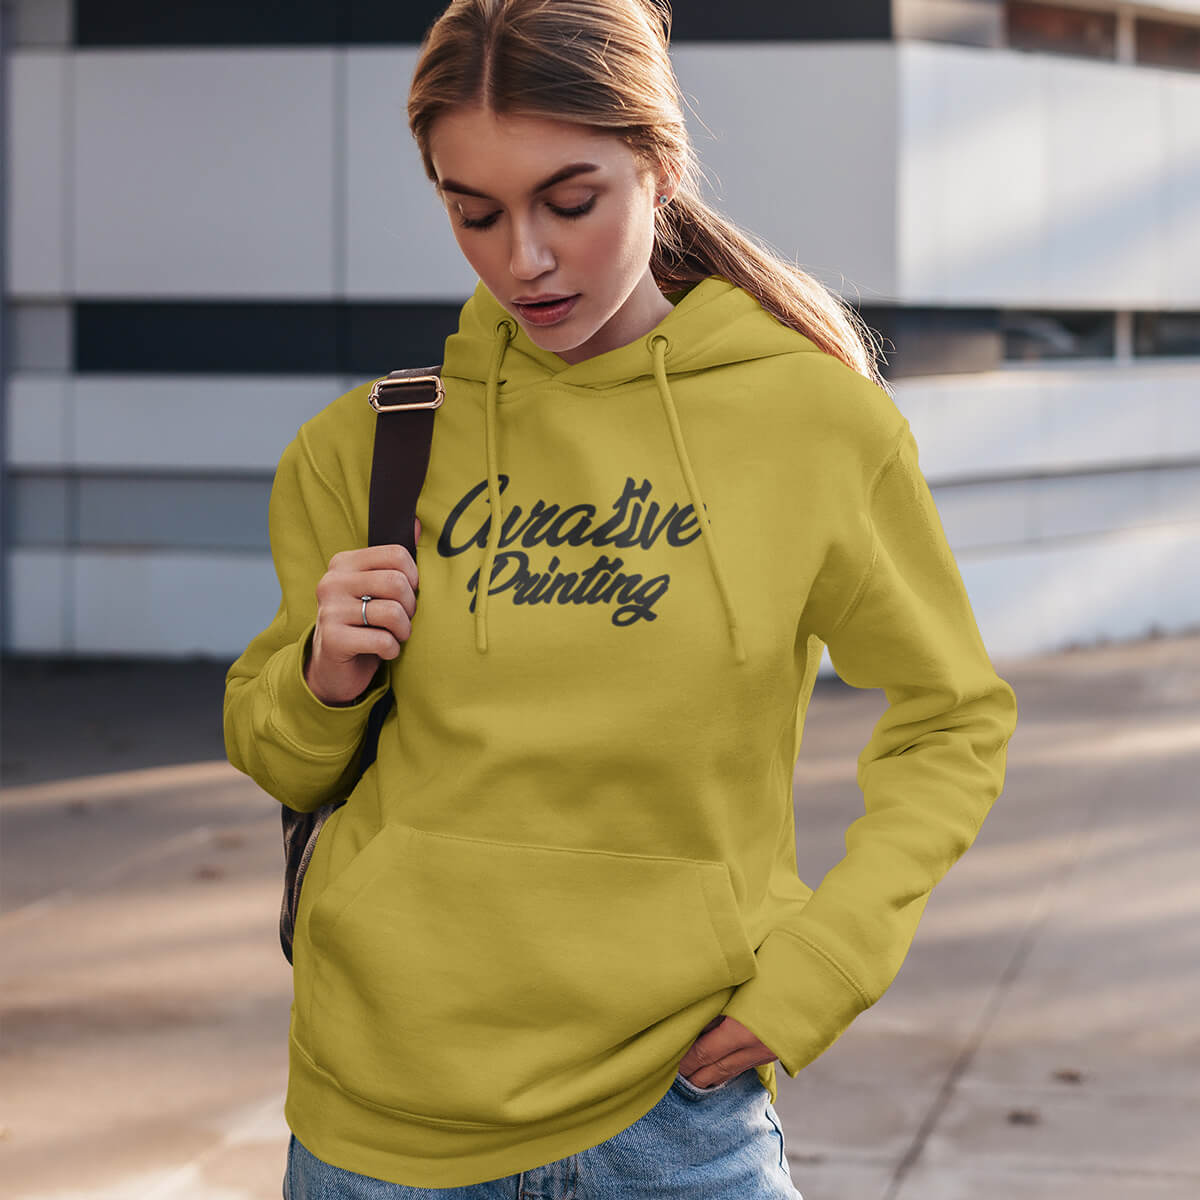 Woman with a bag wearing a yellow pullover hoodie sweatshirt with black curative printing logo imprint